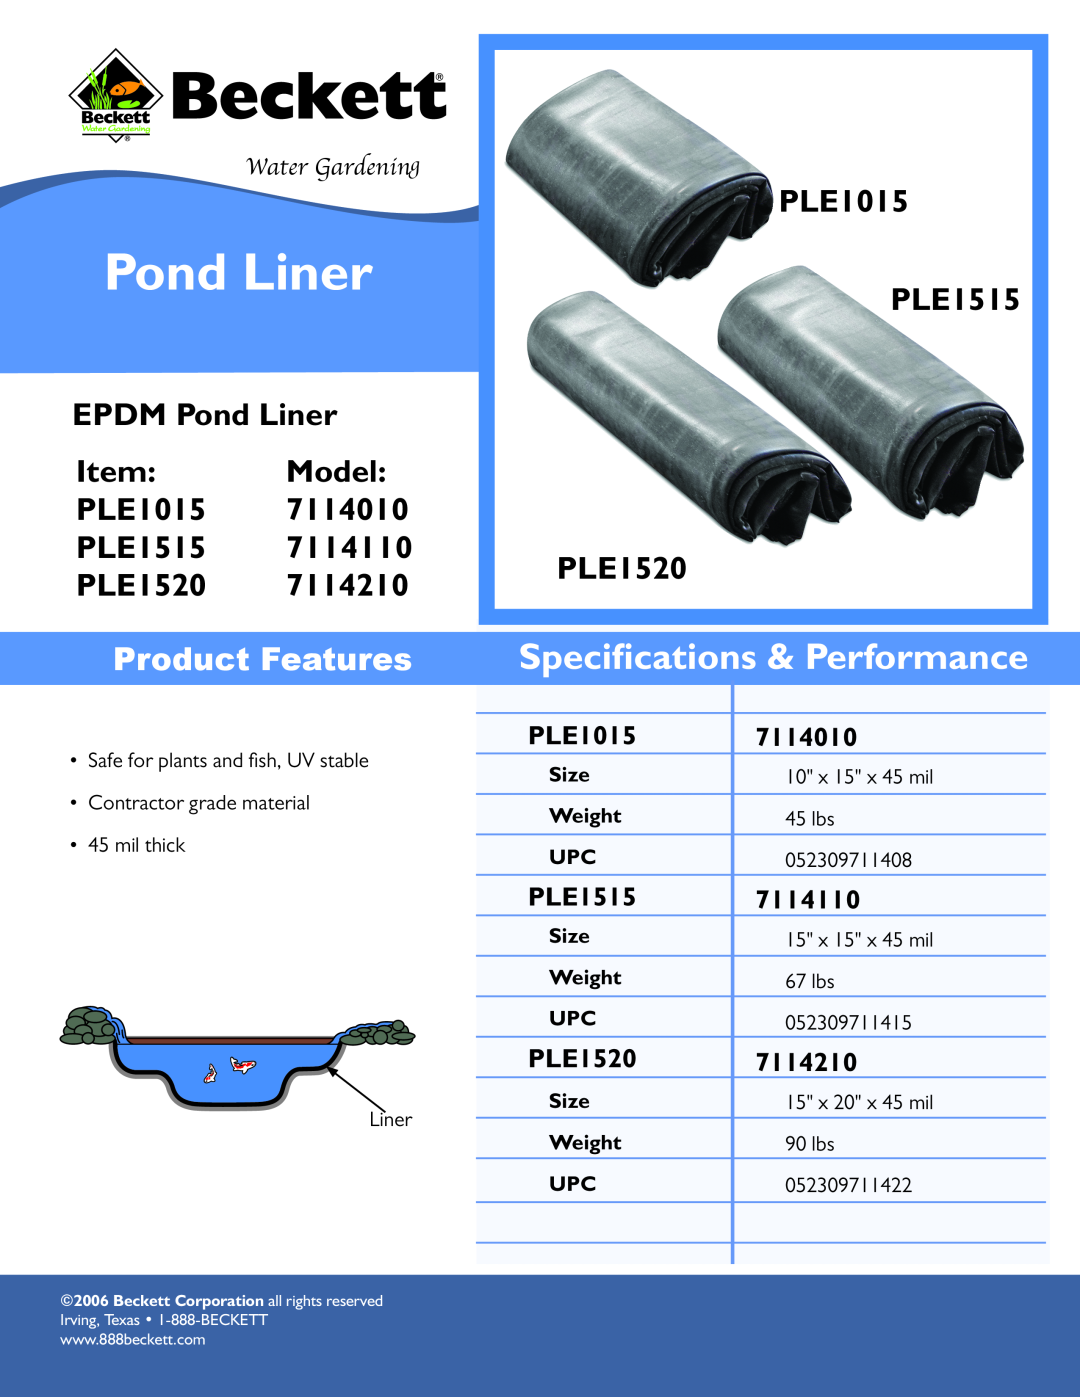 Beckett Water Gardening 7114010 specifications Pond Liner, Speciﬁcations & Performance, PLE1520, Product Features, PLE1015 